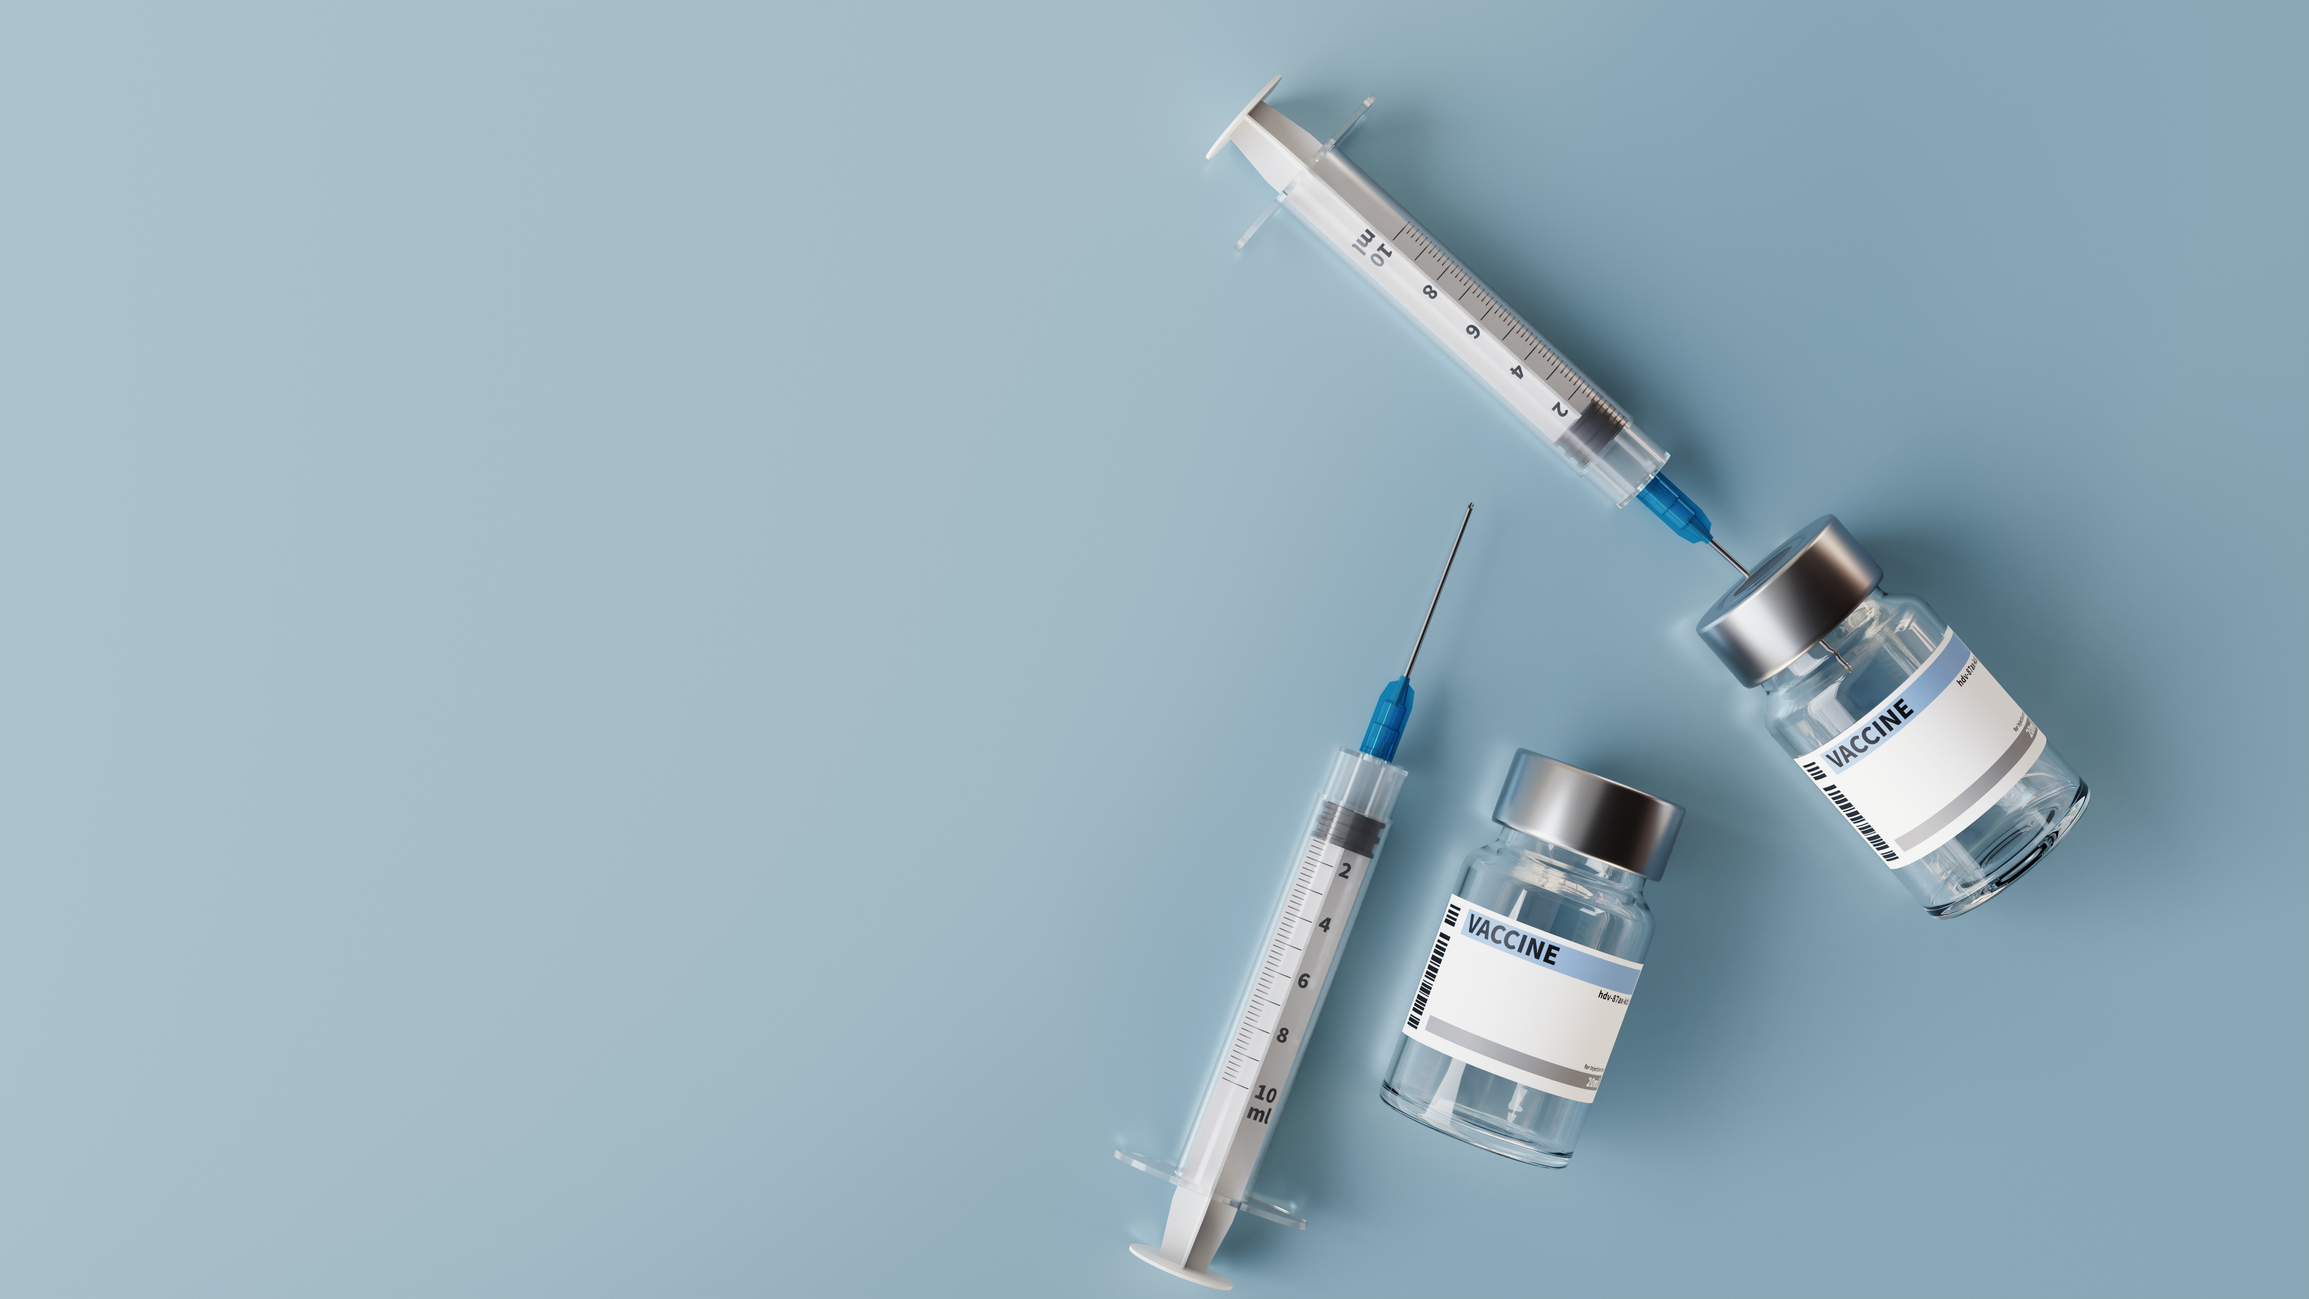 Discover several ways providers can increase their immunization rates.